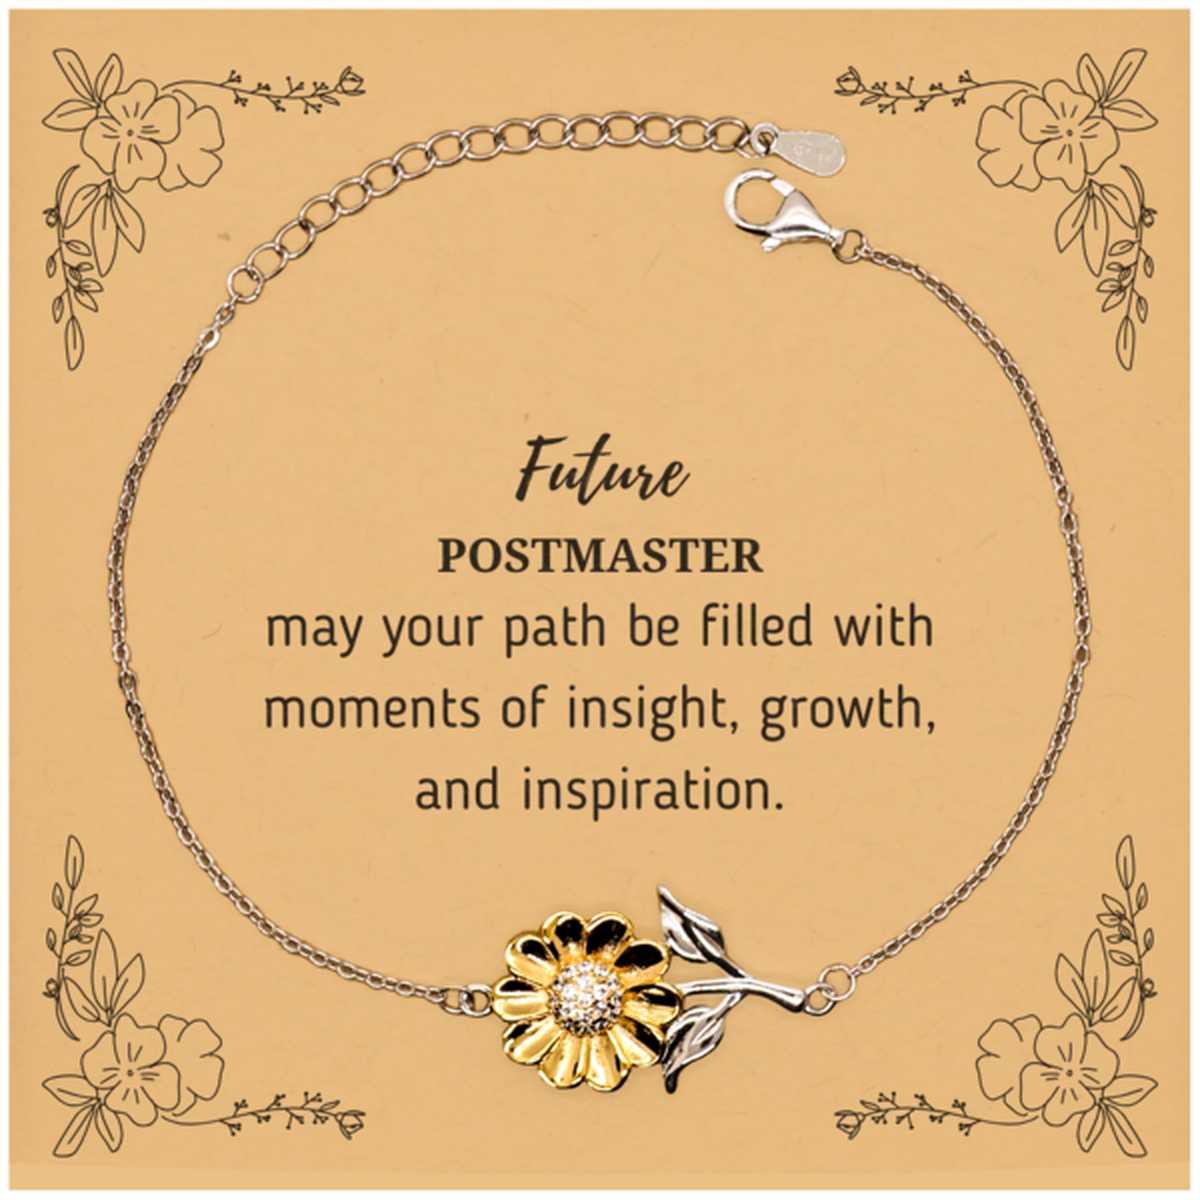 Future Postmaster Gifts, May your path be filled with moments of insight, Graduation Gifts for New Postmaster, Christmas Unique Sunflower Bracelet For Men, Women, Friends